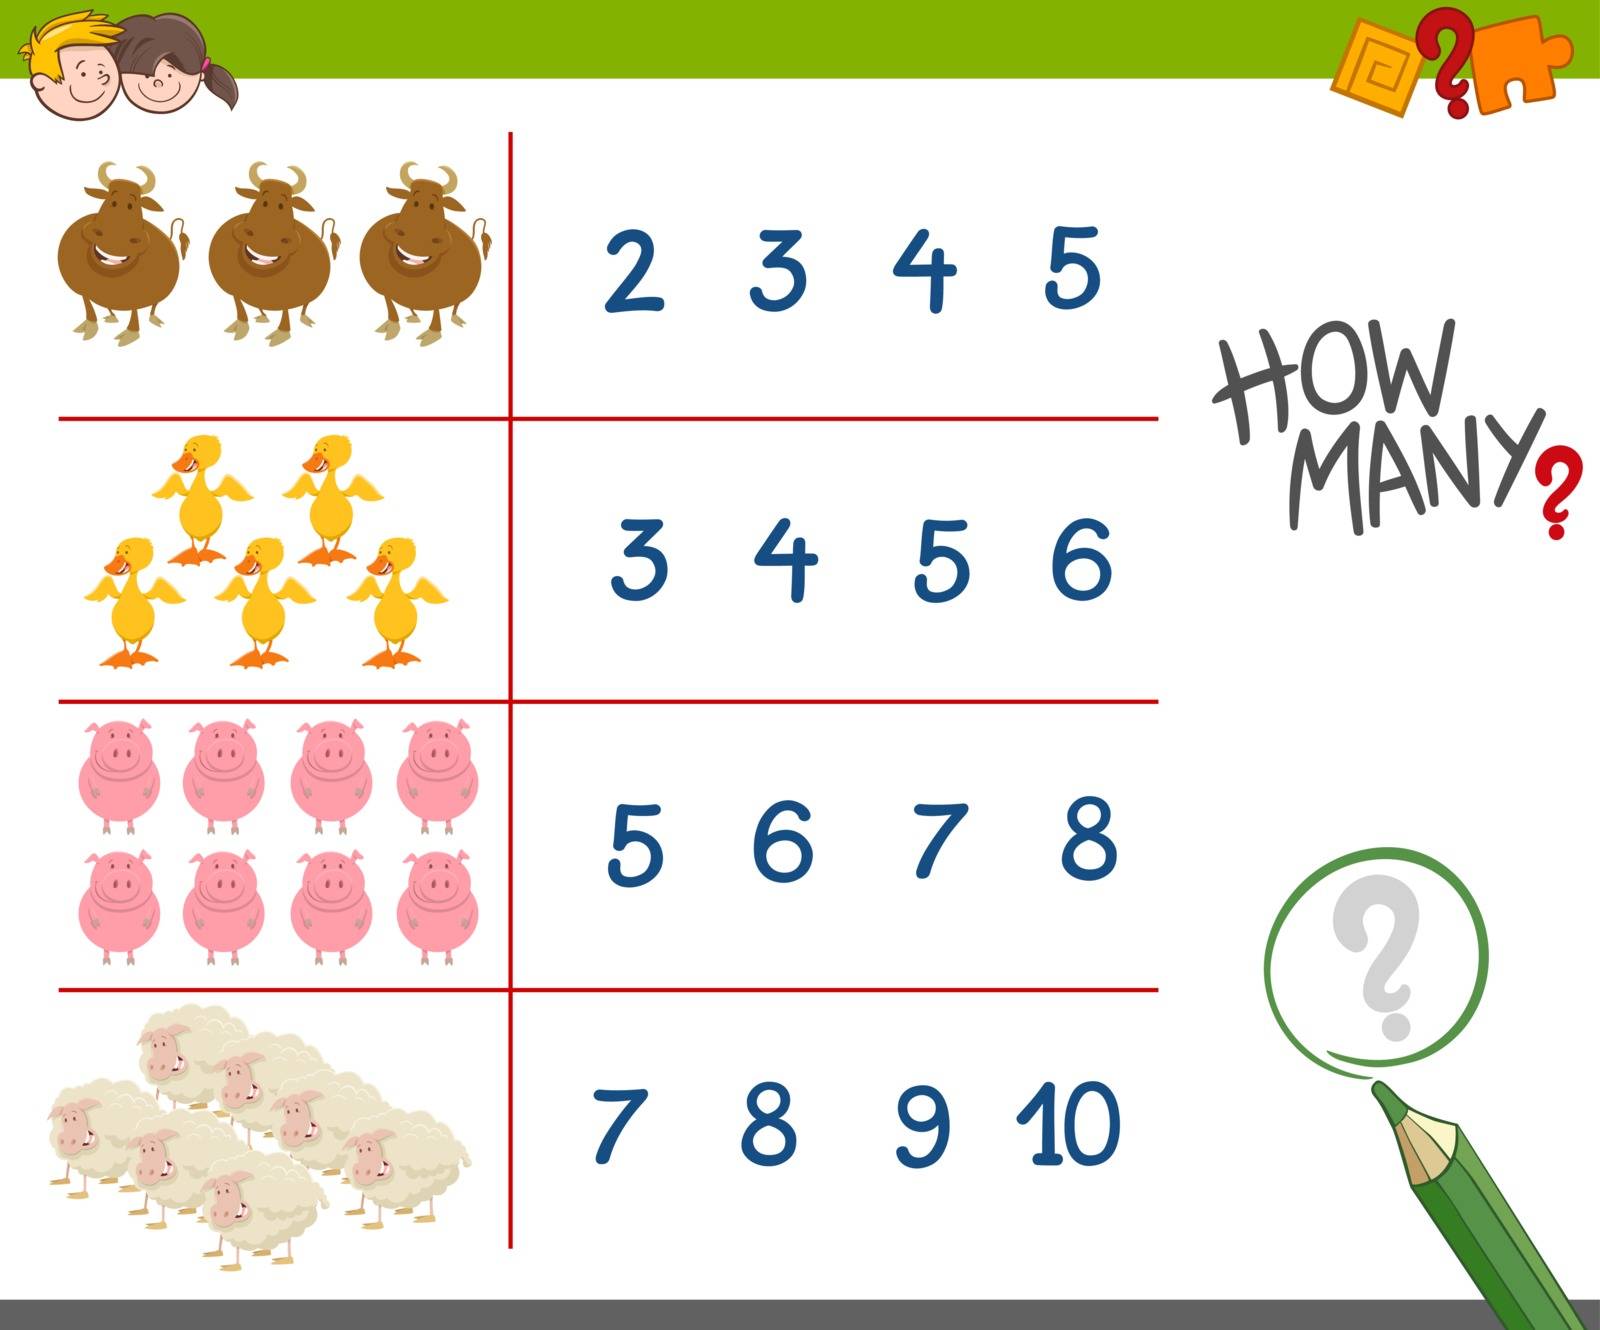 Cartoon Illustration of Educational Counting Game for Children with Cute Farm Animal Characters